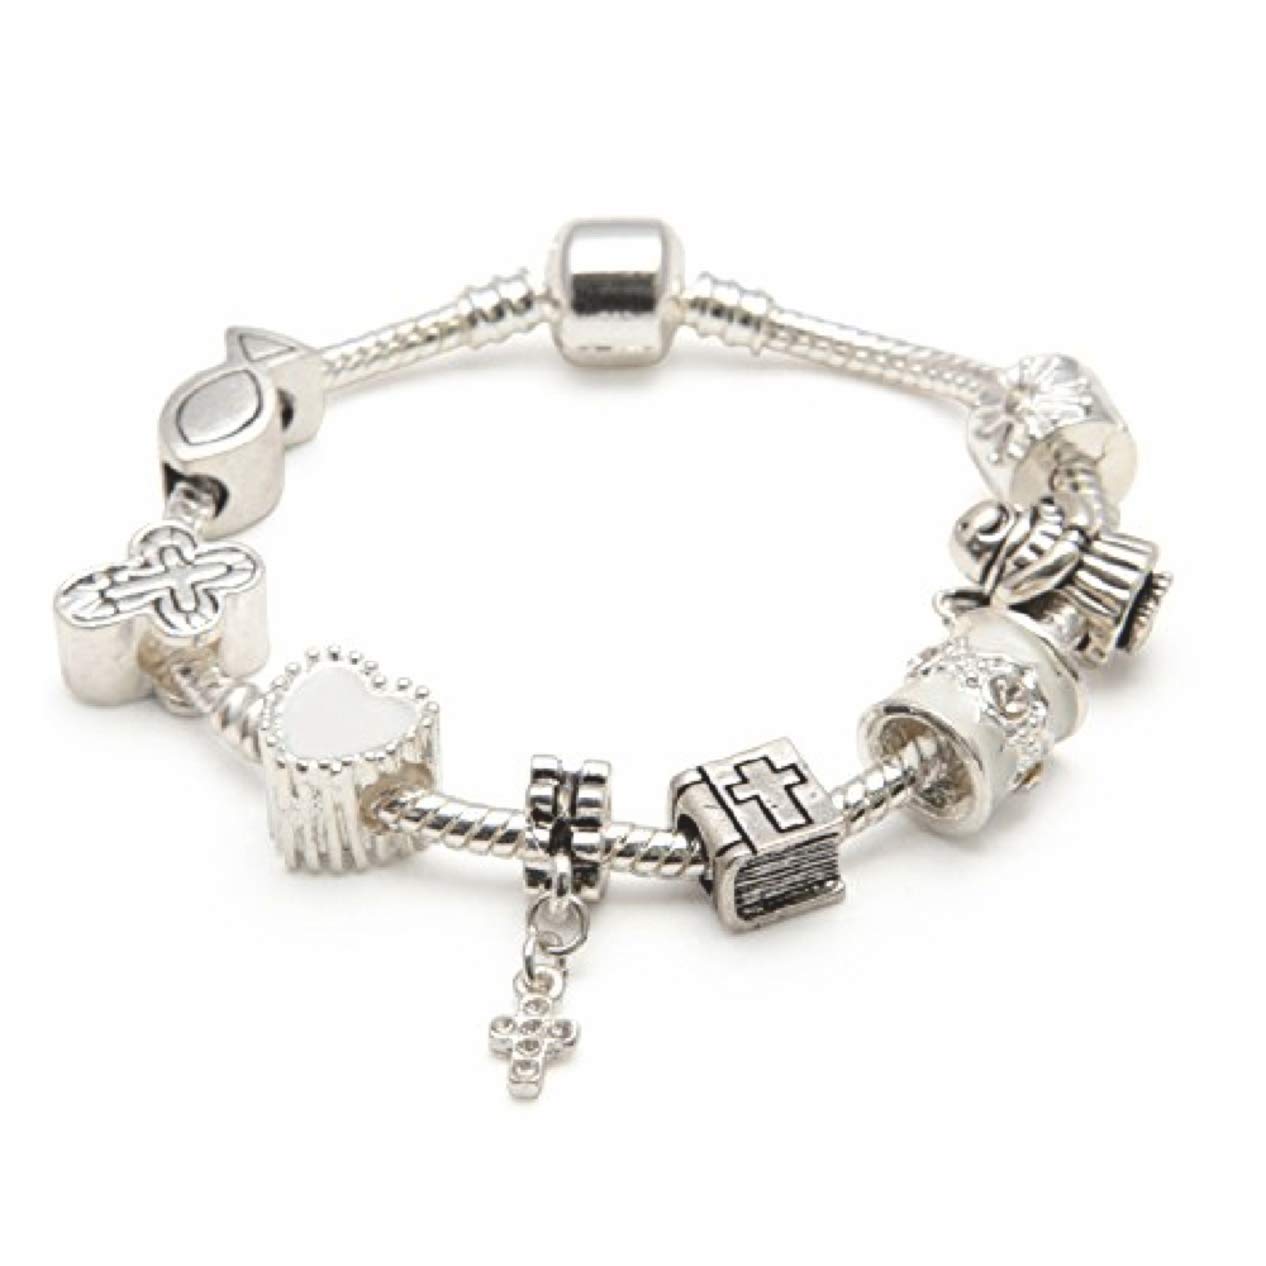 Liberty Charms First Communion Gifts for Girls Silver Plated Charm Bracelet with Gift Box